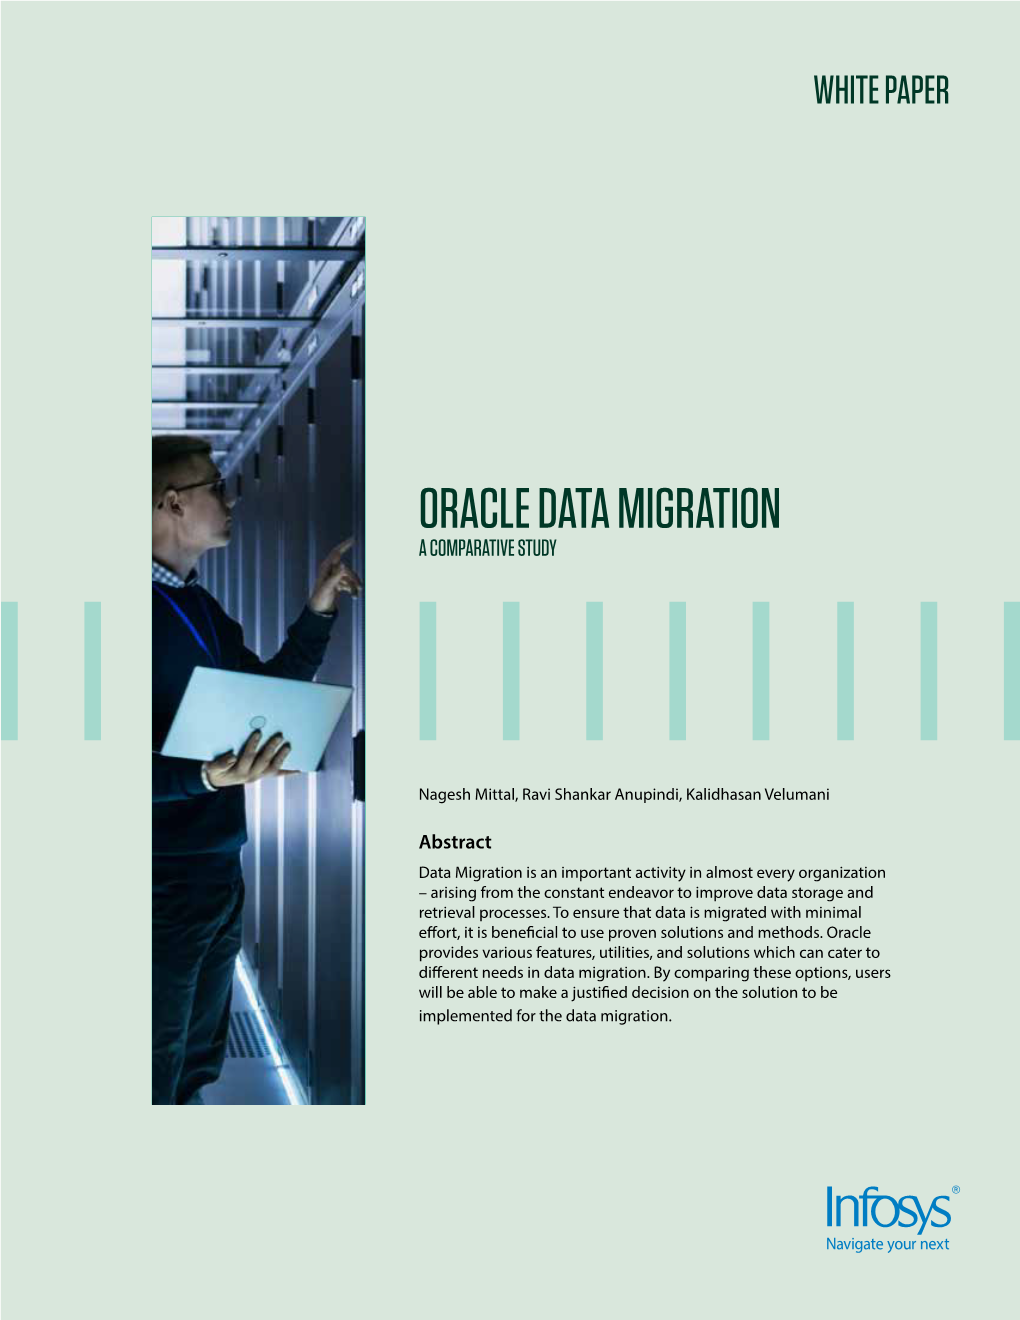 Oracle Data Migration – a Comparative Study